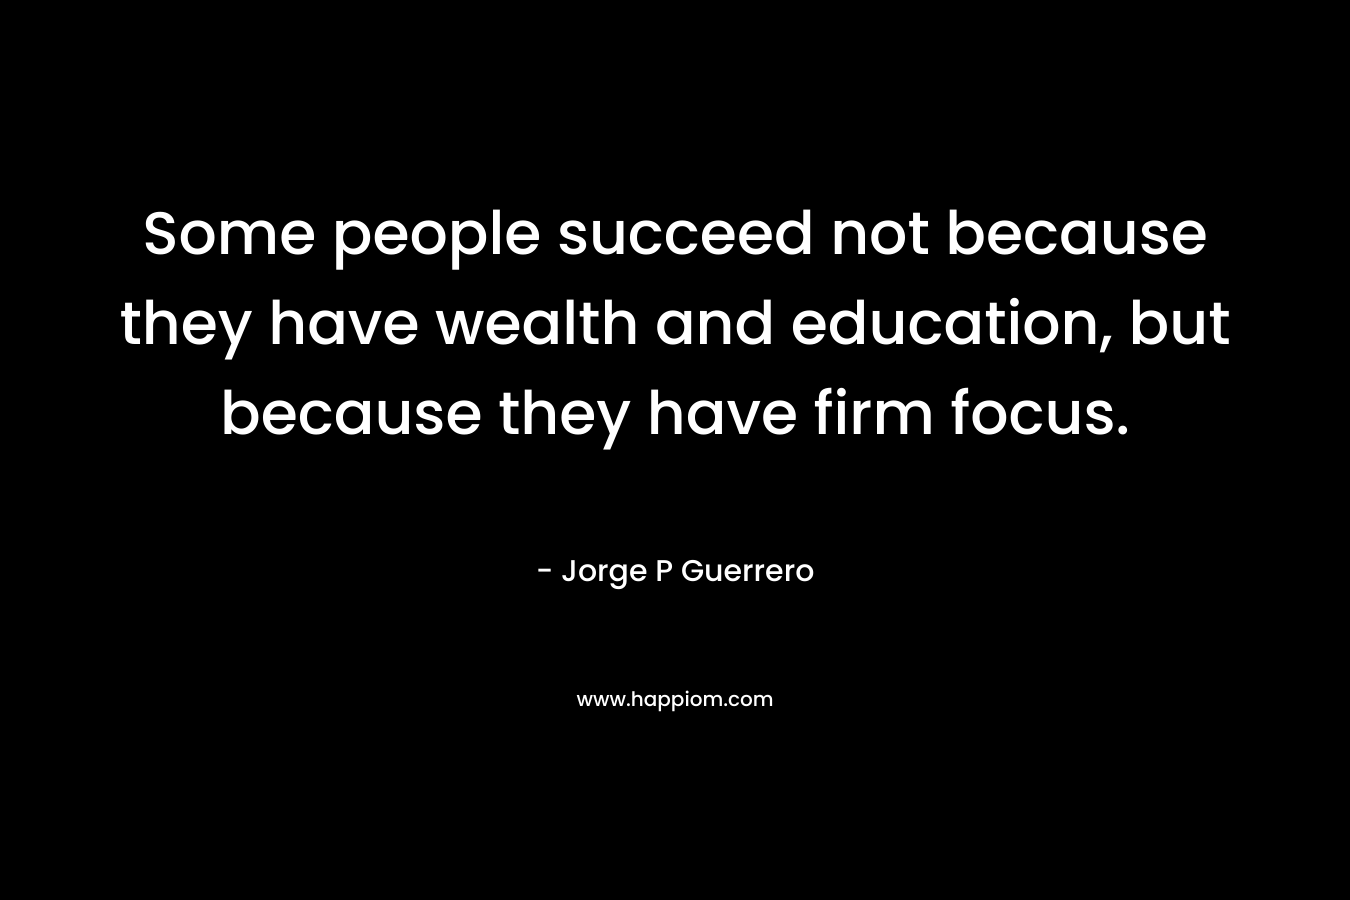 Some people succeed not because they have wealth and education, but because they have firm focus.